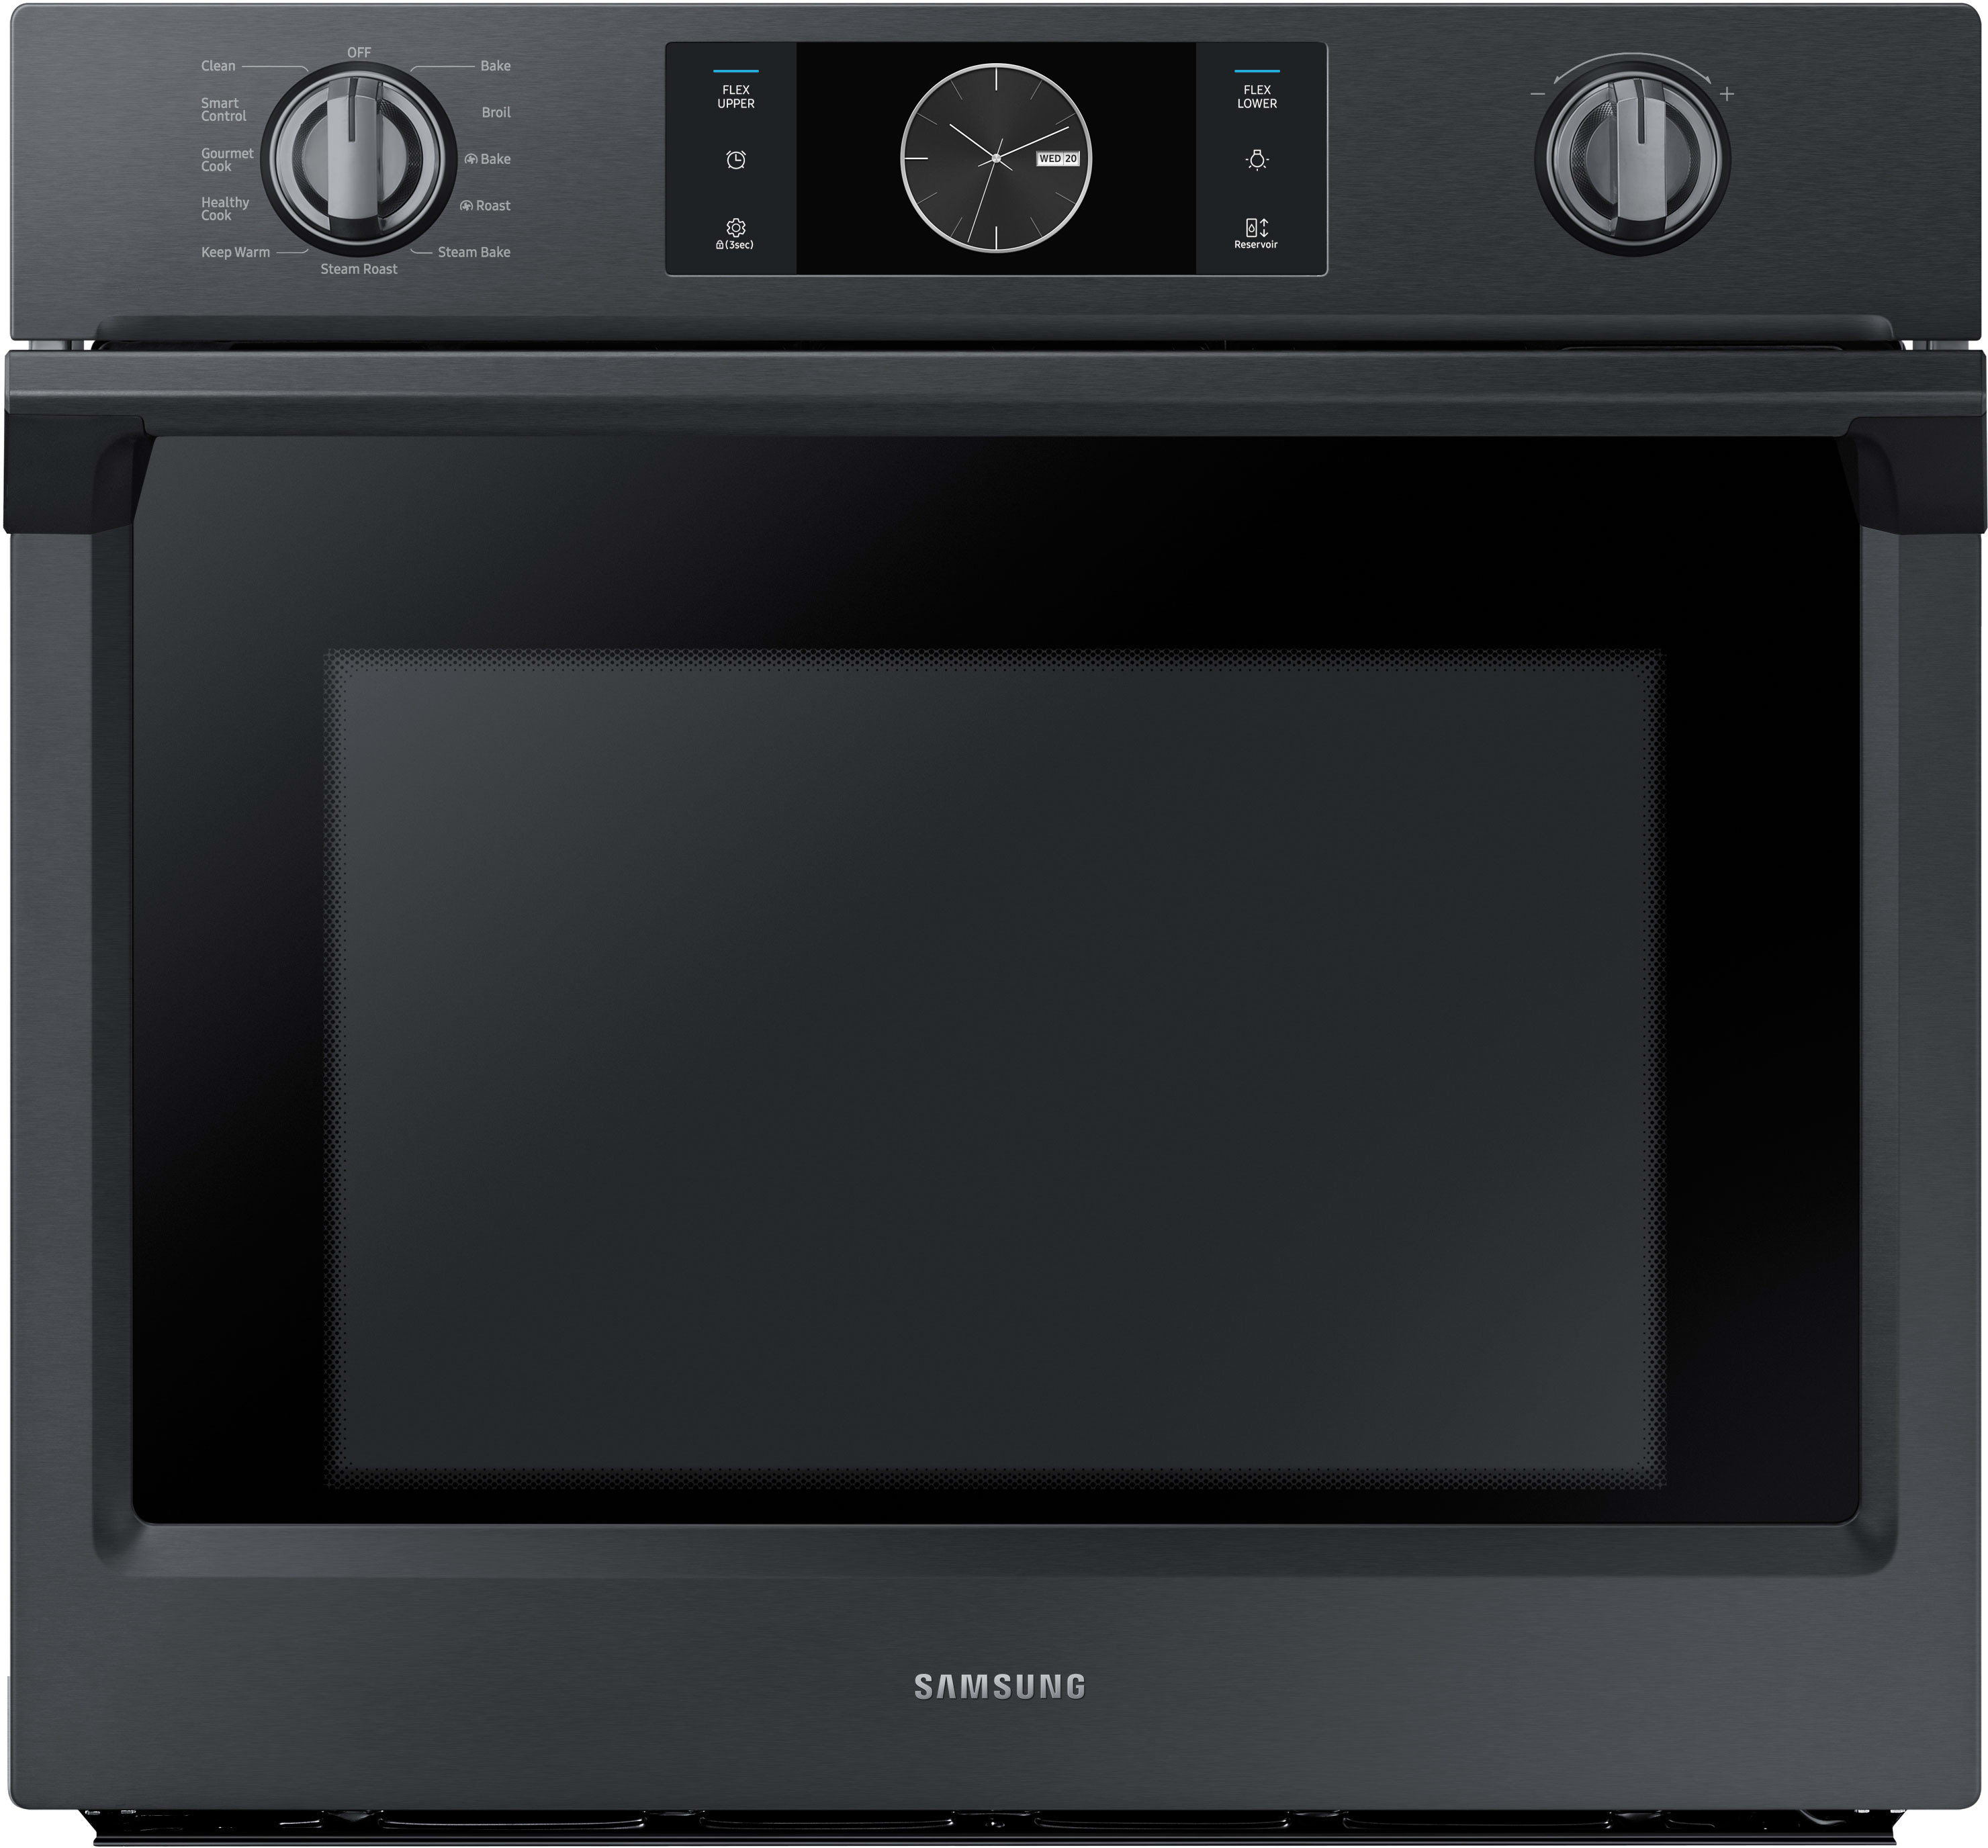 Samsung NV51K7770SG 30 Inch Wall Oven with 5.1 cu. ft. Capacity, Steam Cook, Flex Duo with Smart